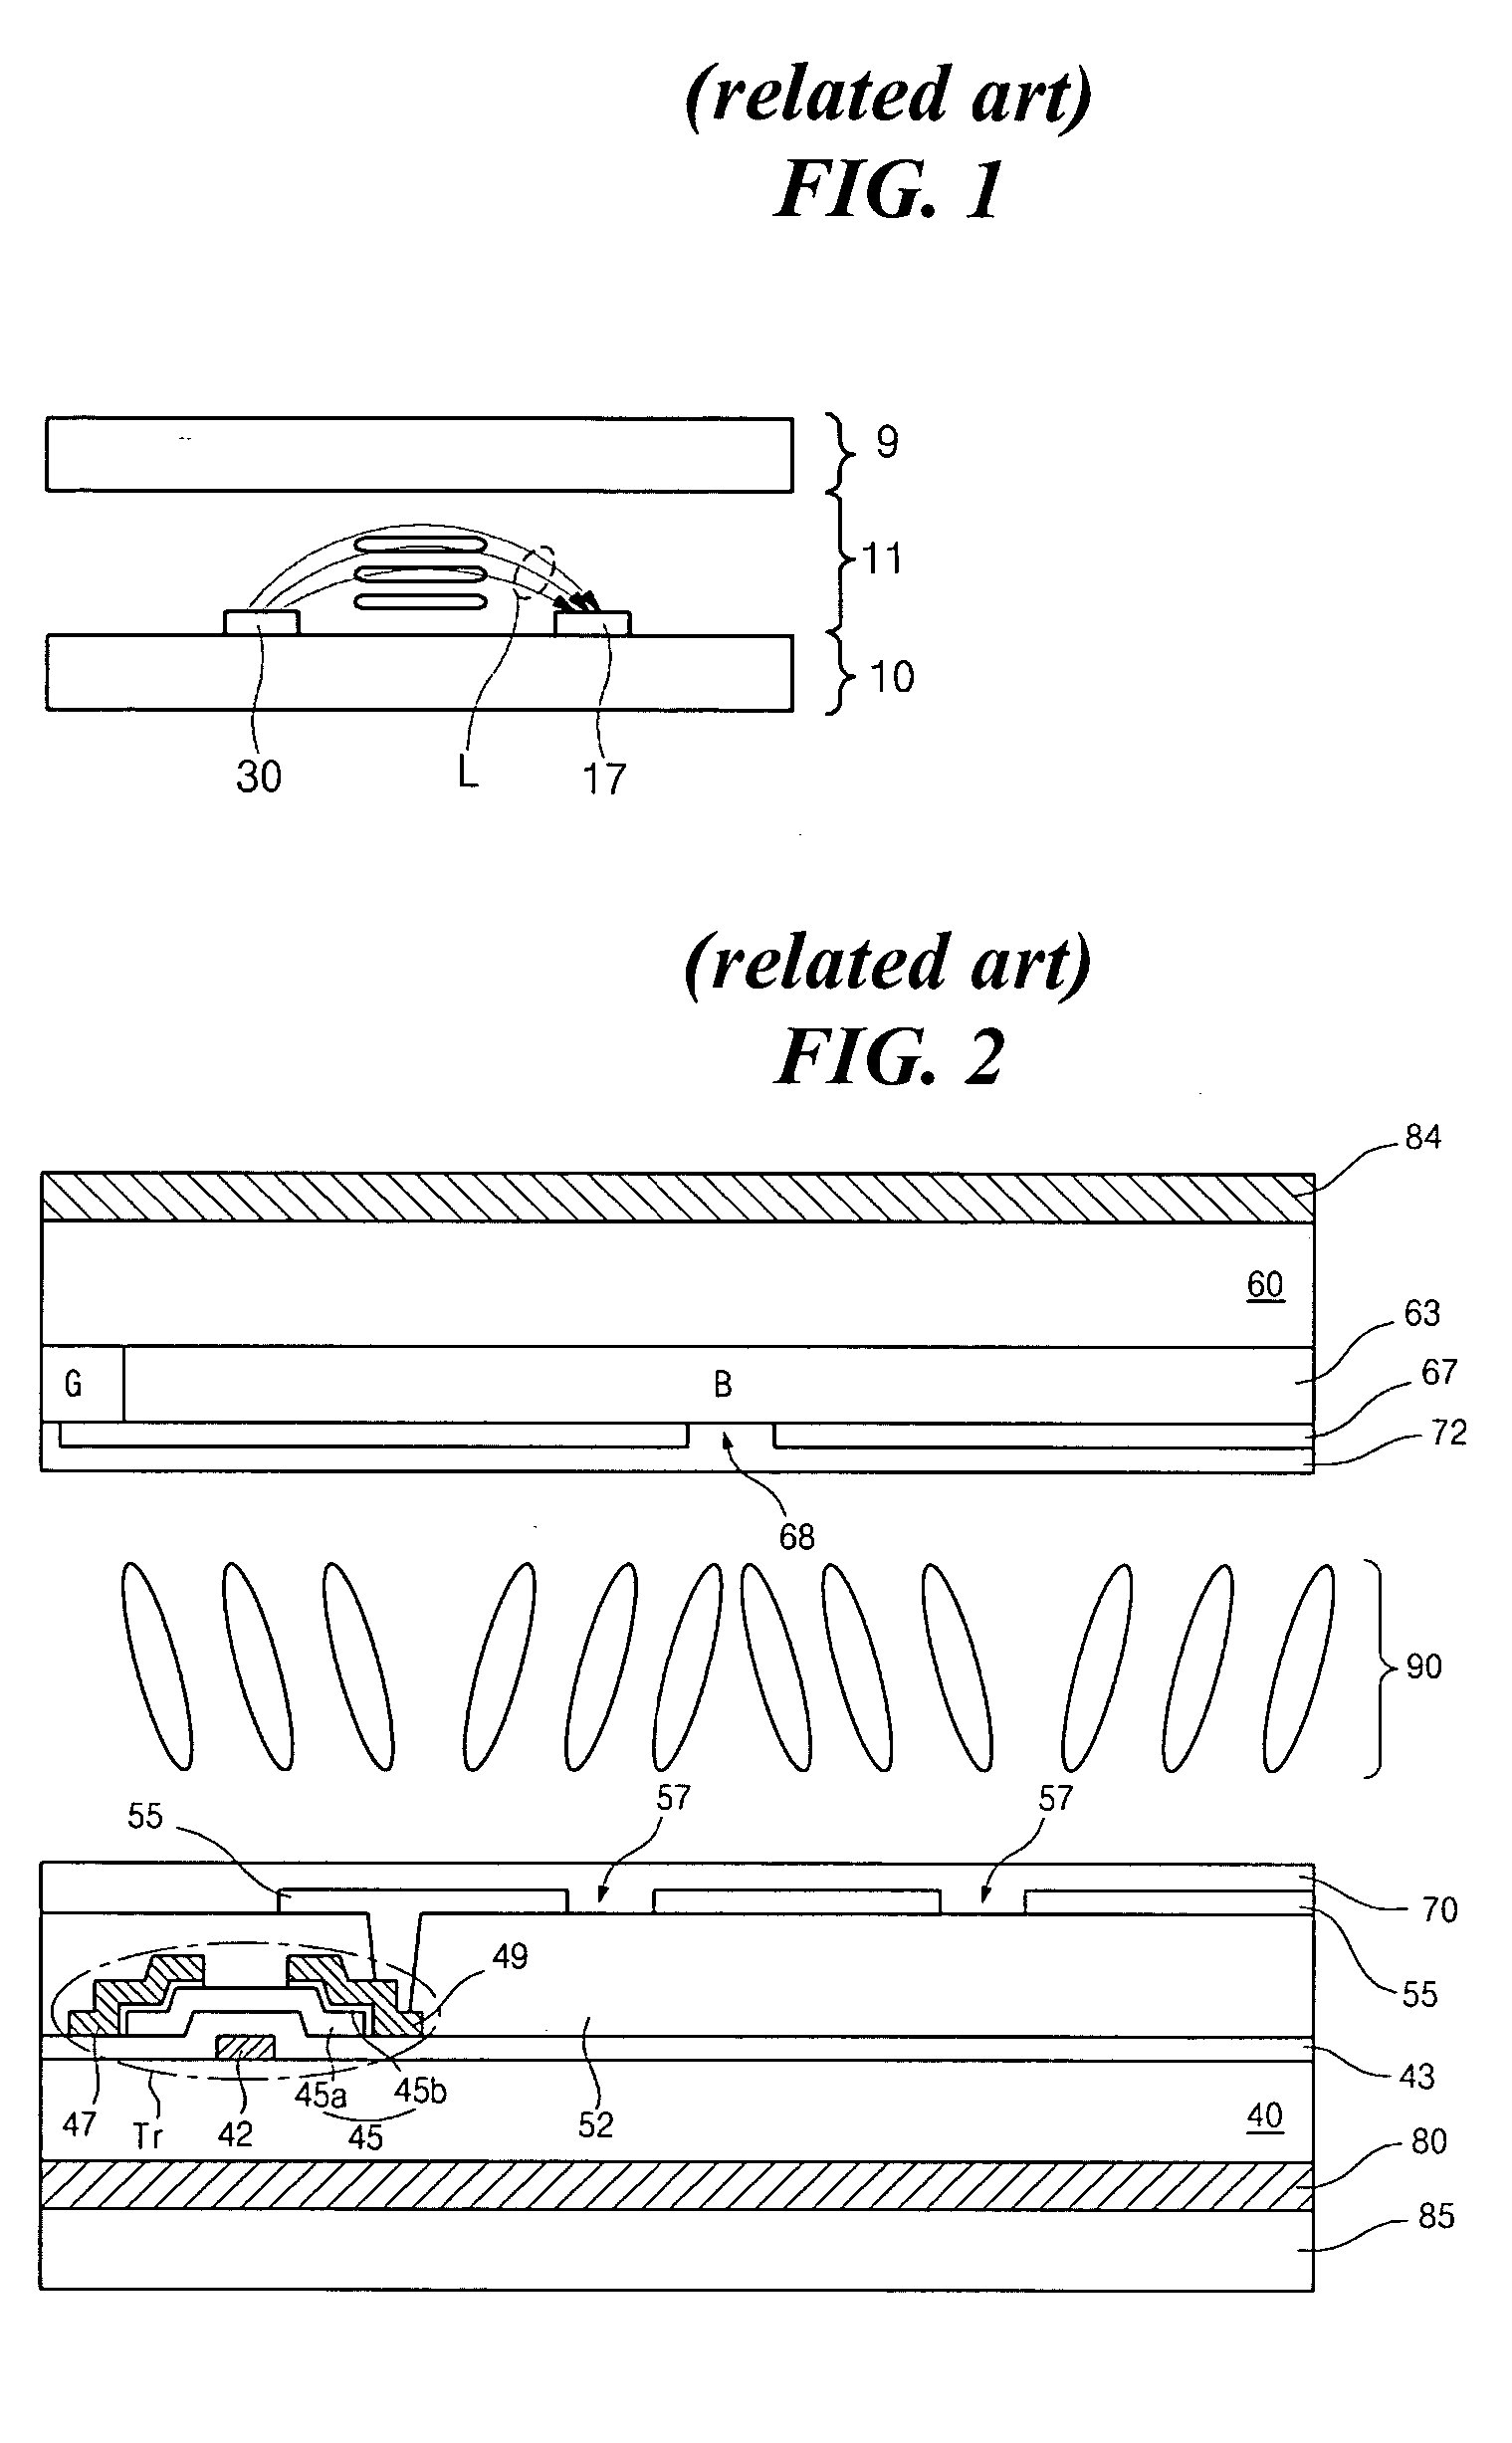 Liquid crystal display device having a wide viewing angle